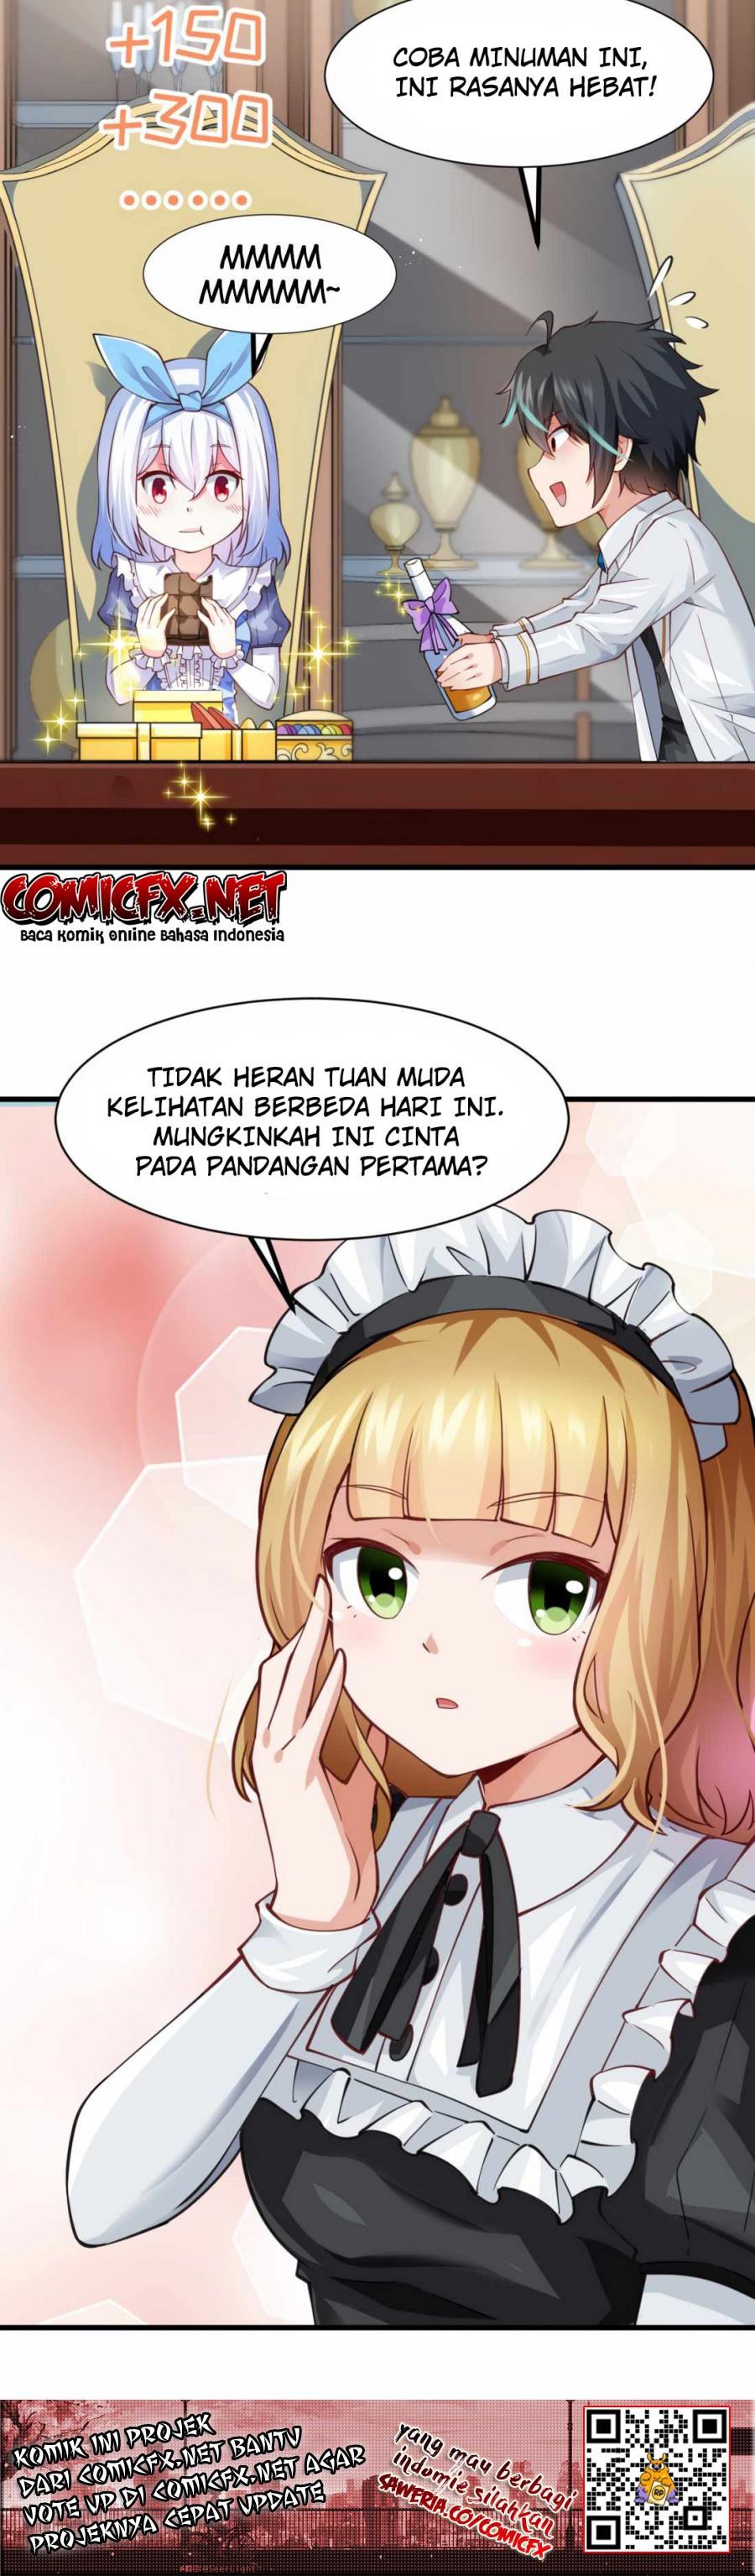 Dilarang COPAS - situs resmi www.mangacanblog.com - Komik little tyrant doesnt want to meet with a bad end 002 - chapter 2 3 Indonesia little tyrant doesnt want to meet with a bad end 002 - chapter 2 Terbaru 18|Baca Manga Komik Indonesia|Mangacan